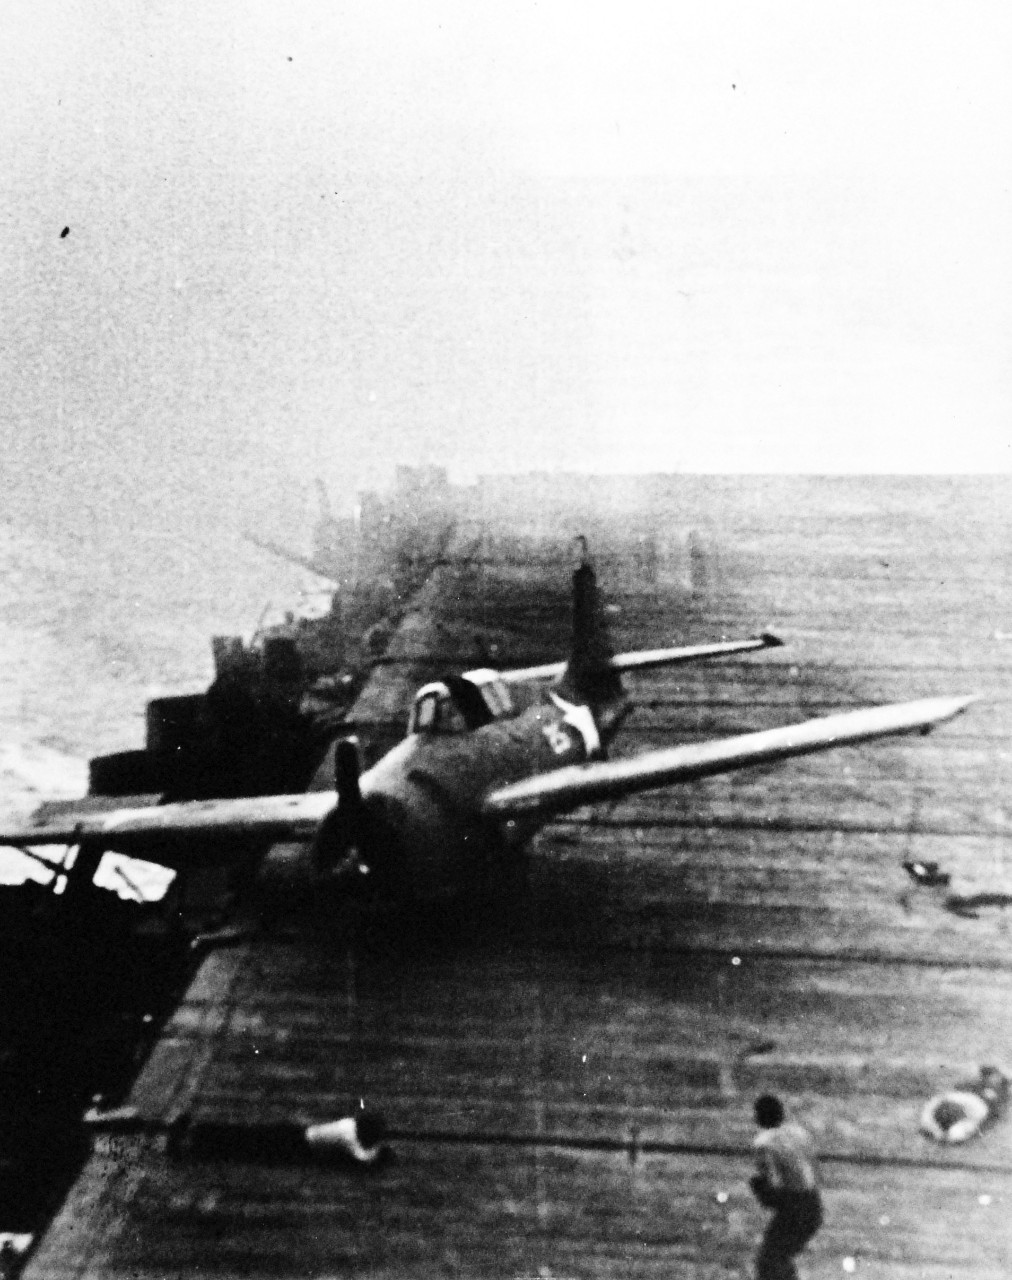 80-G-42561:  Battle of Santa Cruz Islands,  26 October 1942.   Scene from the flight deck of USS Enterprise (CV 6).  Lurching to the edge of the flight deck as a result of a near miss by a Japanse bomb, this US Navy plane finally halts just before plunging into a gun gallery.  Note, a member of the crew hitting the deck in order to avoid the swerving wings of the plane.   (8/13/2014).